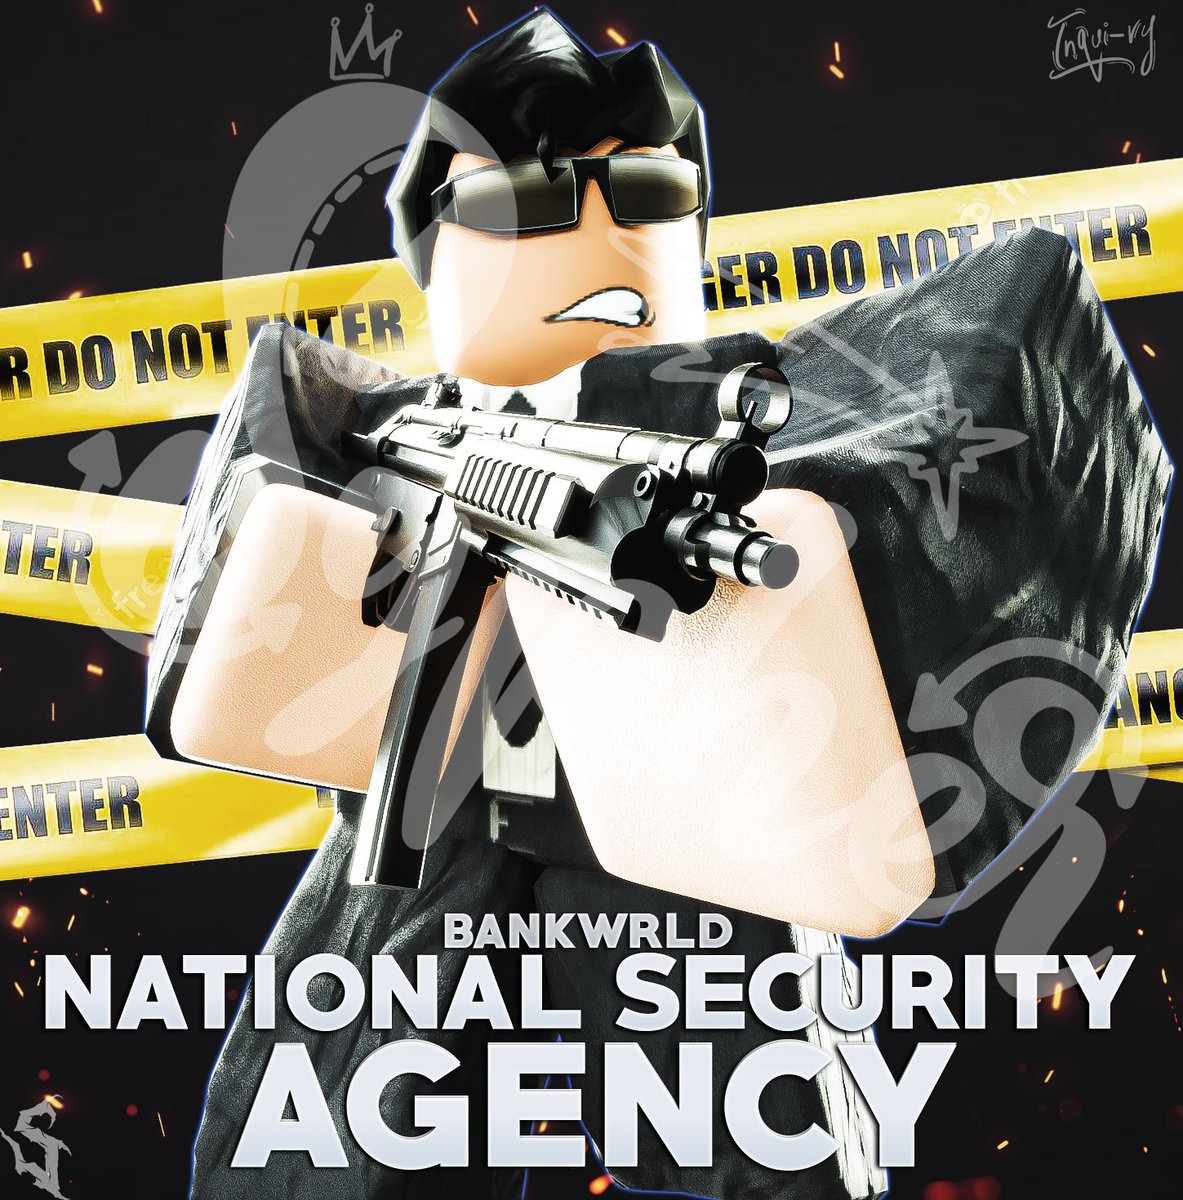 New Heat just dropped! National Security Agency logo! Collab with @Nash_anf1! #RobloxGFX ll #RobloxArt ll #robloxcommission ll #RobloxDev ll #Roblox ll #Roblox || #milsim Commissions are open! Discord link: discord.gg/4TCHH3hmaP (Thumbnail dropping soon for NSA as well!)